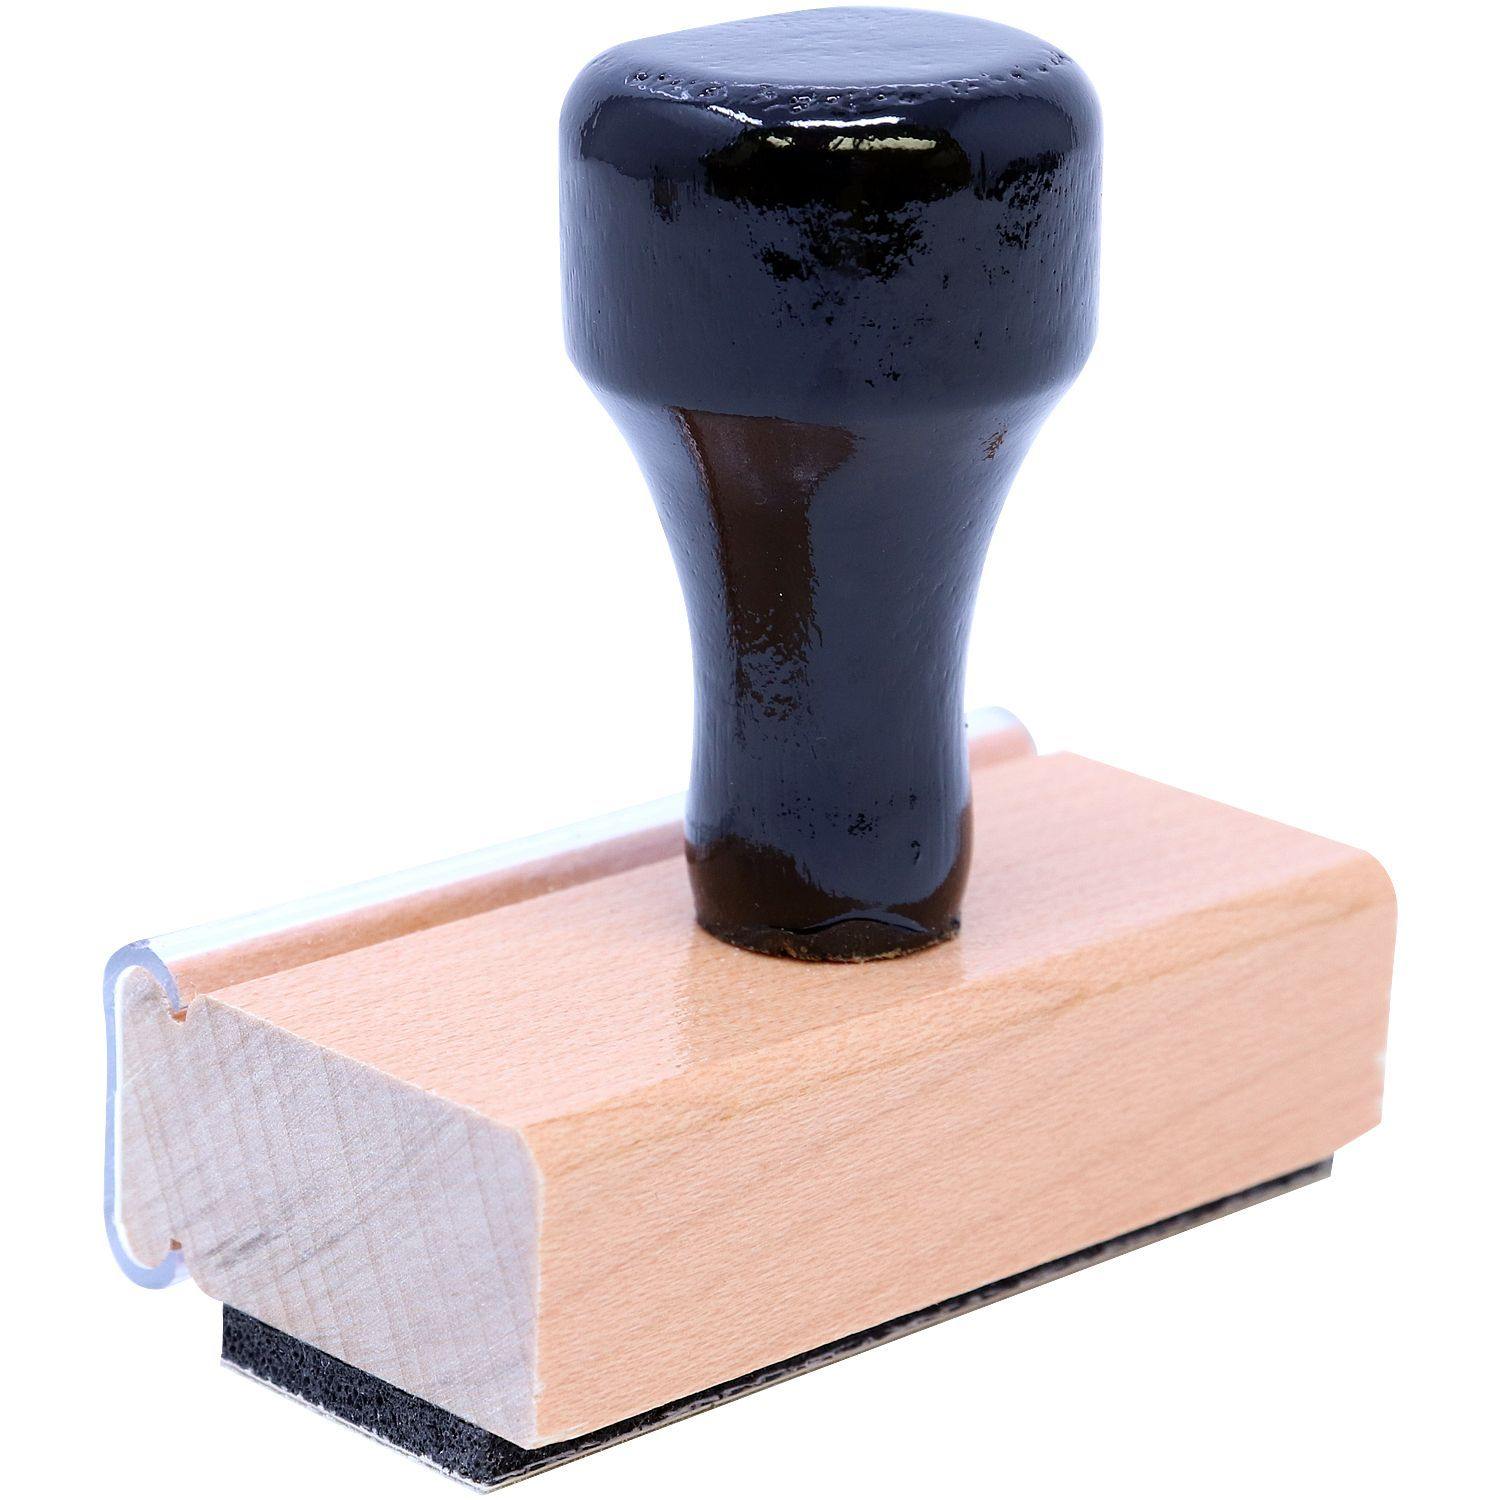 Large Skinny Rush Rubber Stamp - Engineer Seal Stamps - Brand_Acorn, Impression Size_Large, Stamp Type_Regular Stamp, Type of Use_Postal & Mailing, Type of Use_Shipping & Receiving